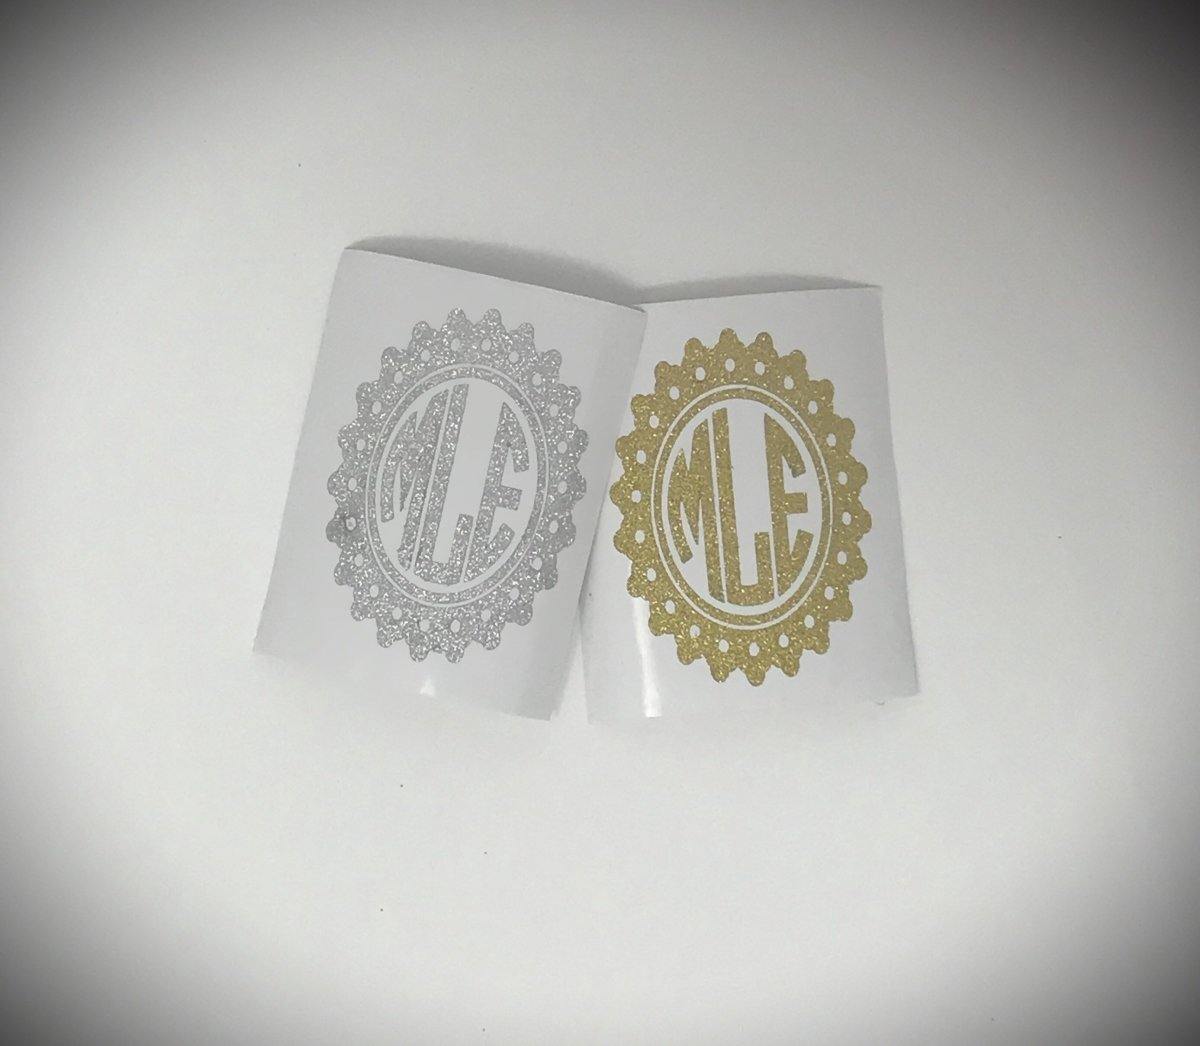 Monogramed cellphone decal - This &amp; That Solutions - Monogramed cellphone decal - Personalized Gifts &amp; Custom Home Decor